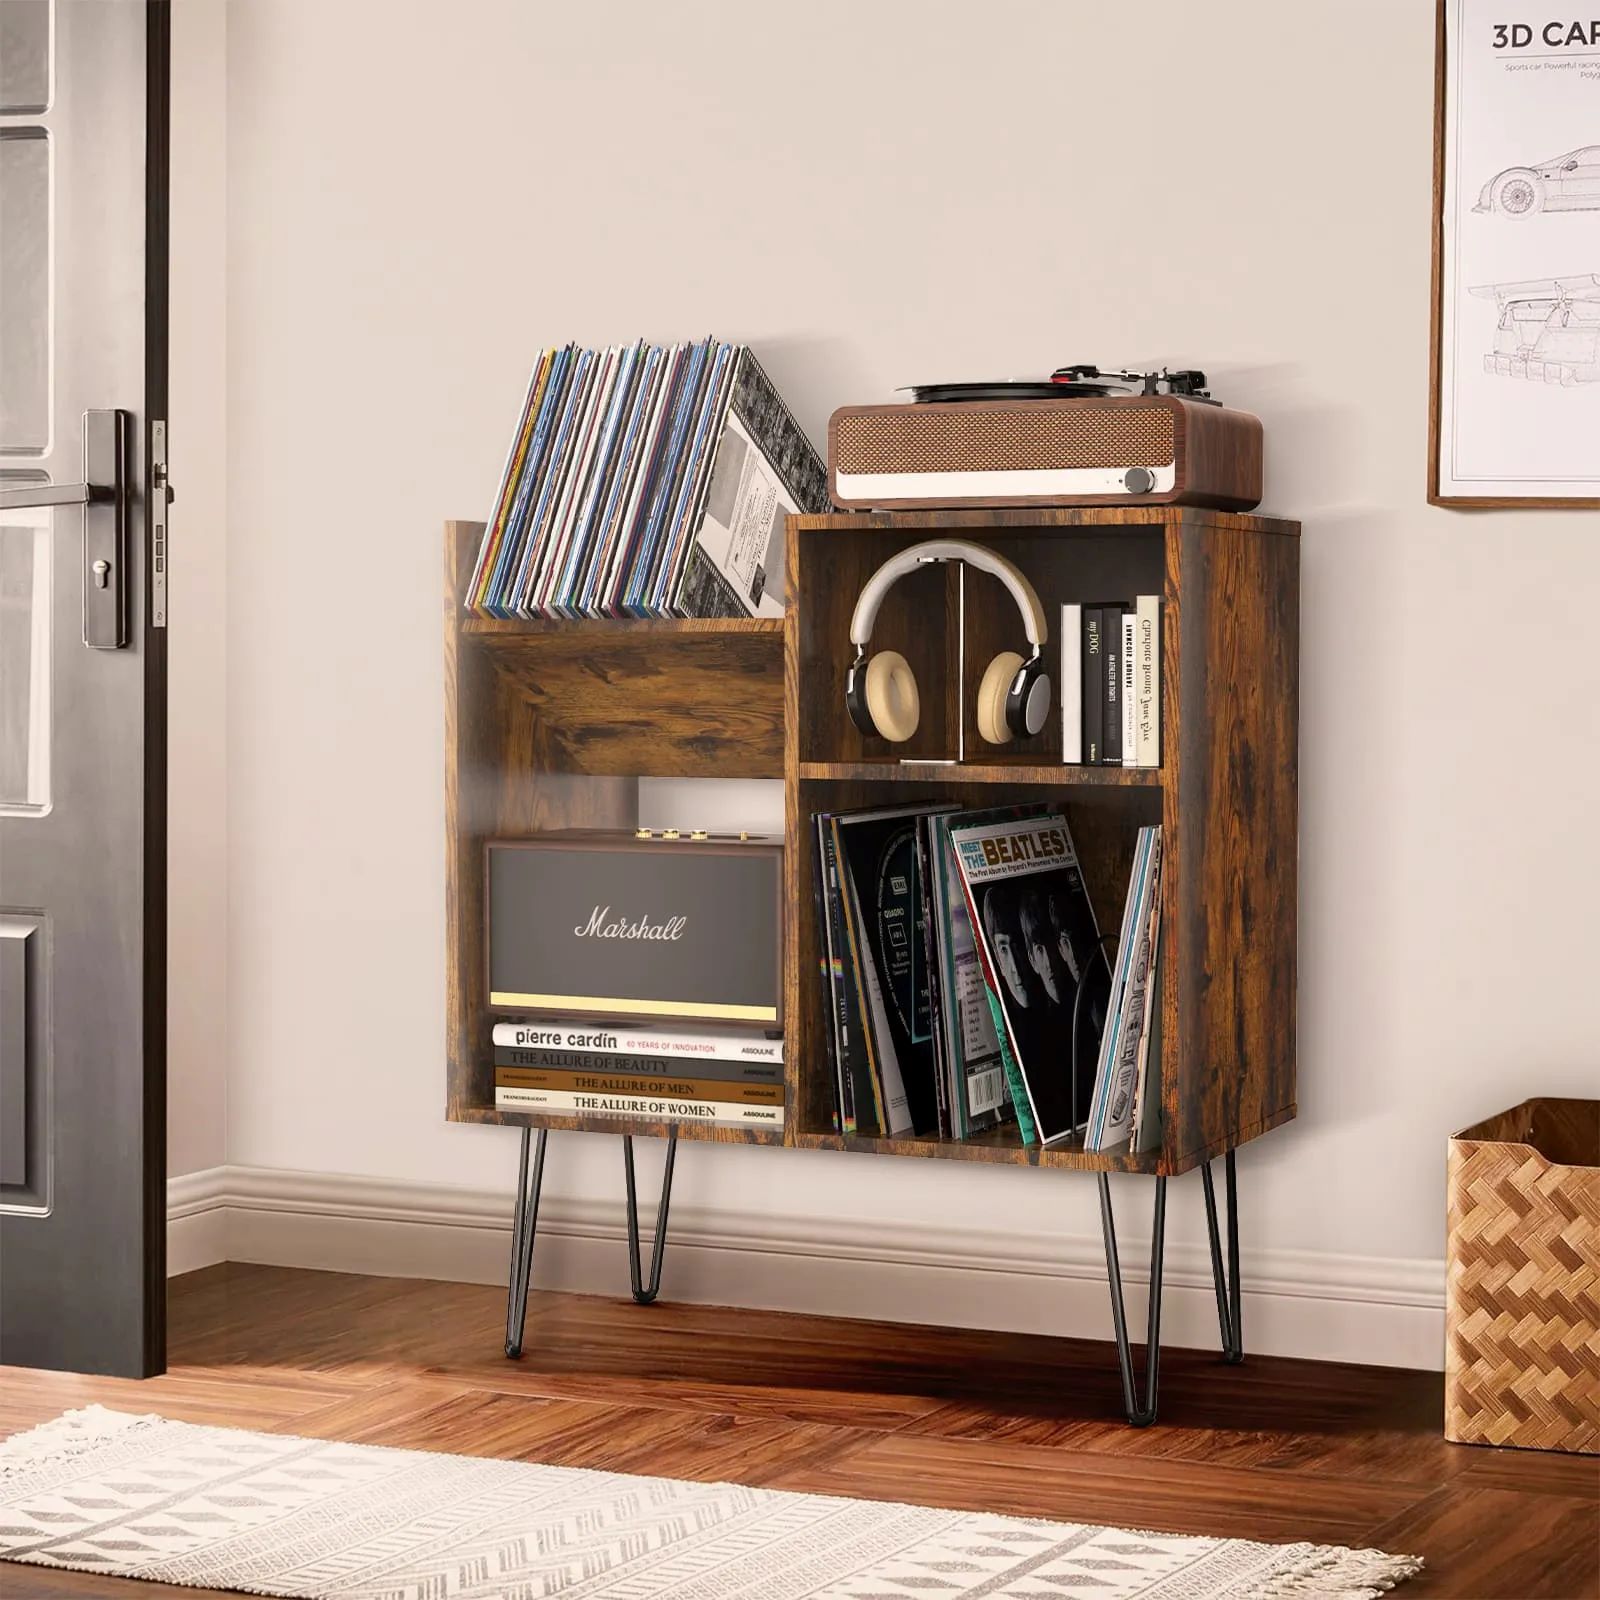 Review: Best Vinyl Record Player Stand for Your Collection